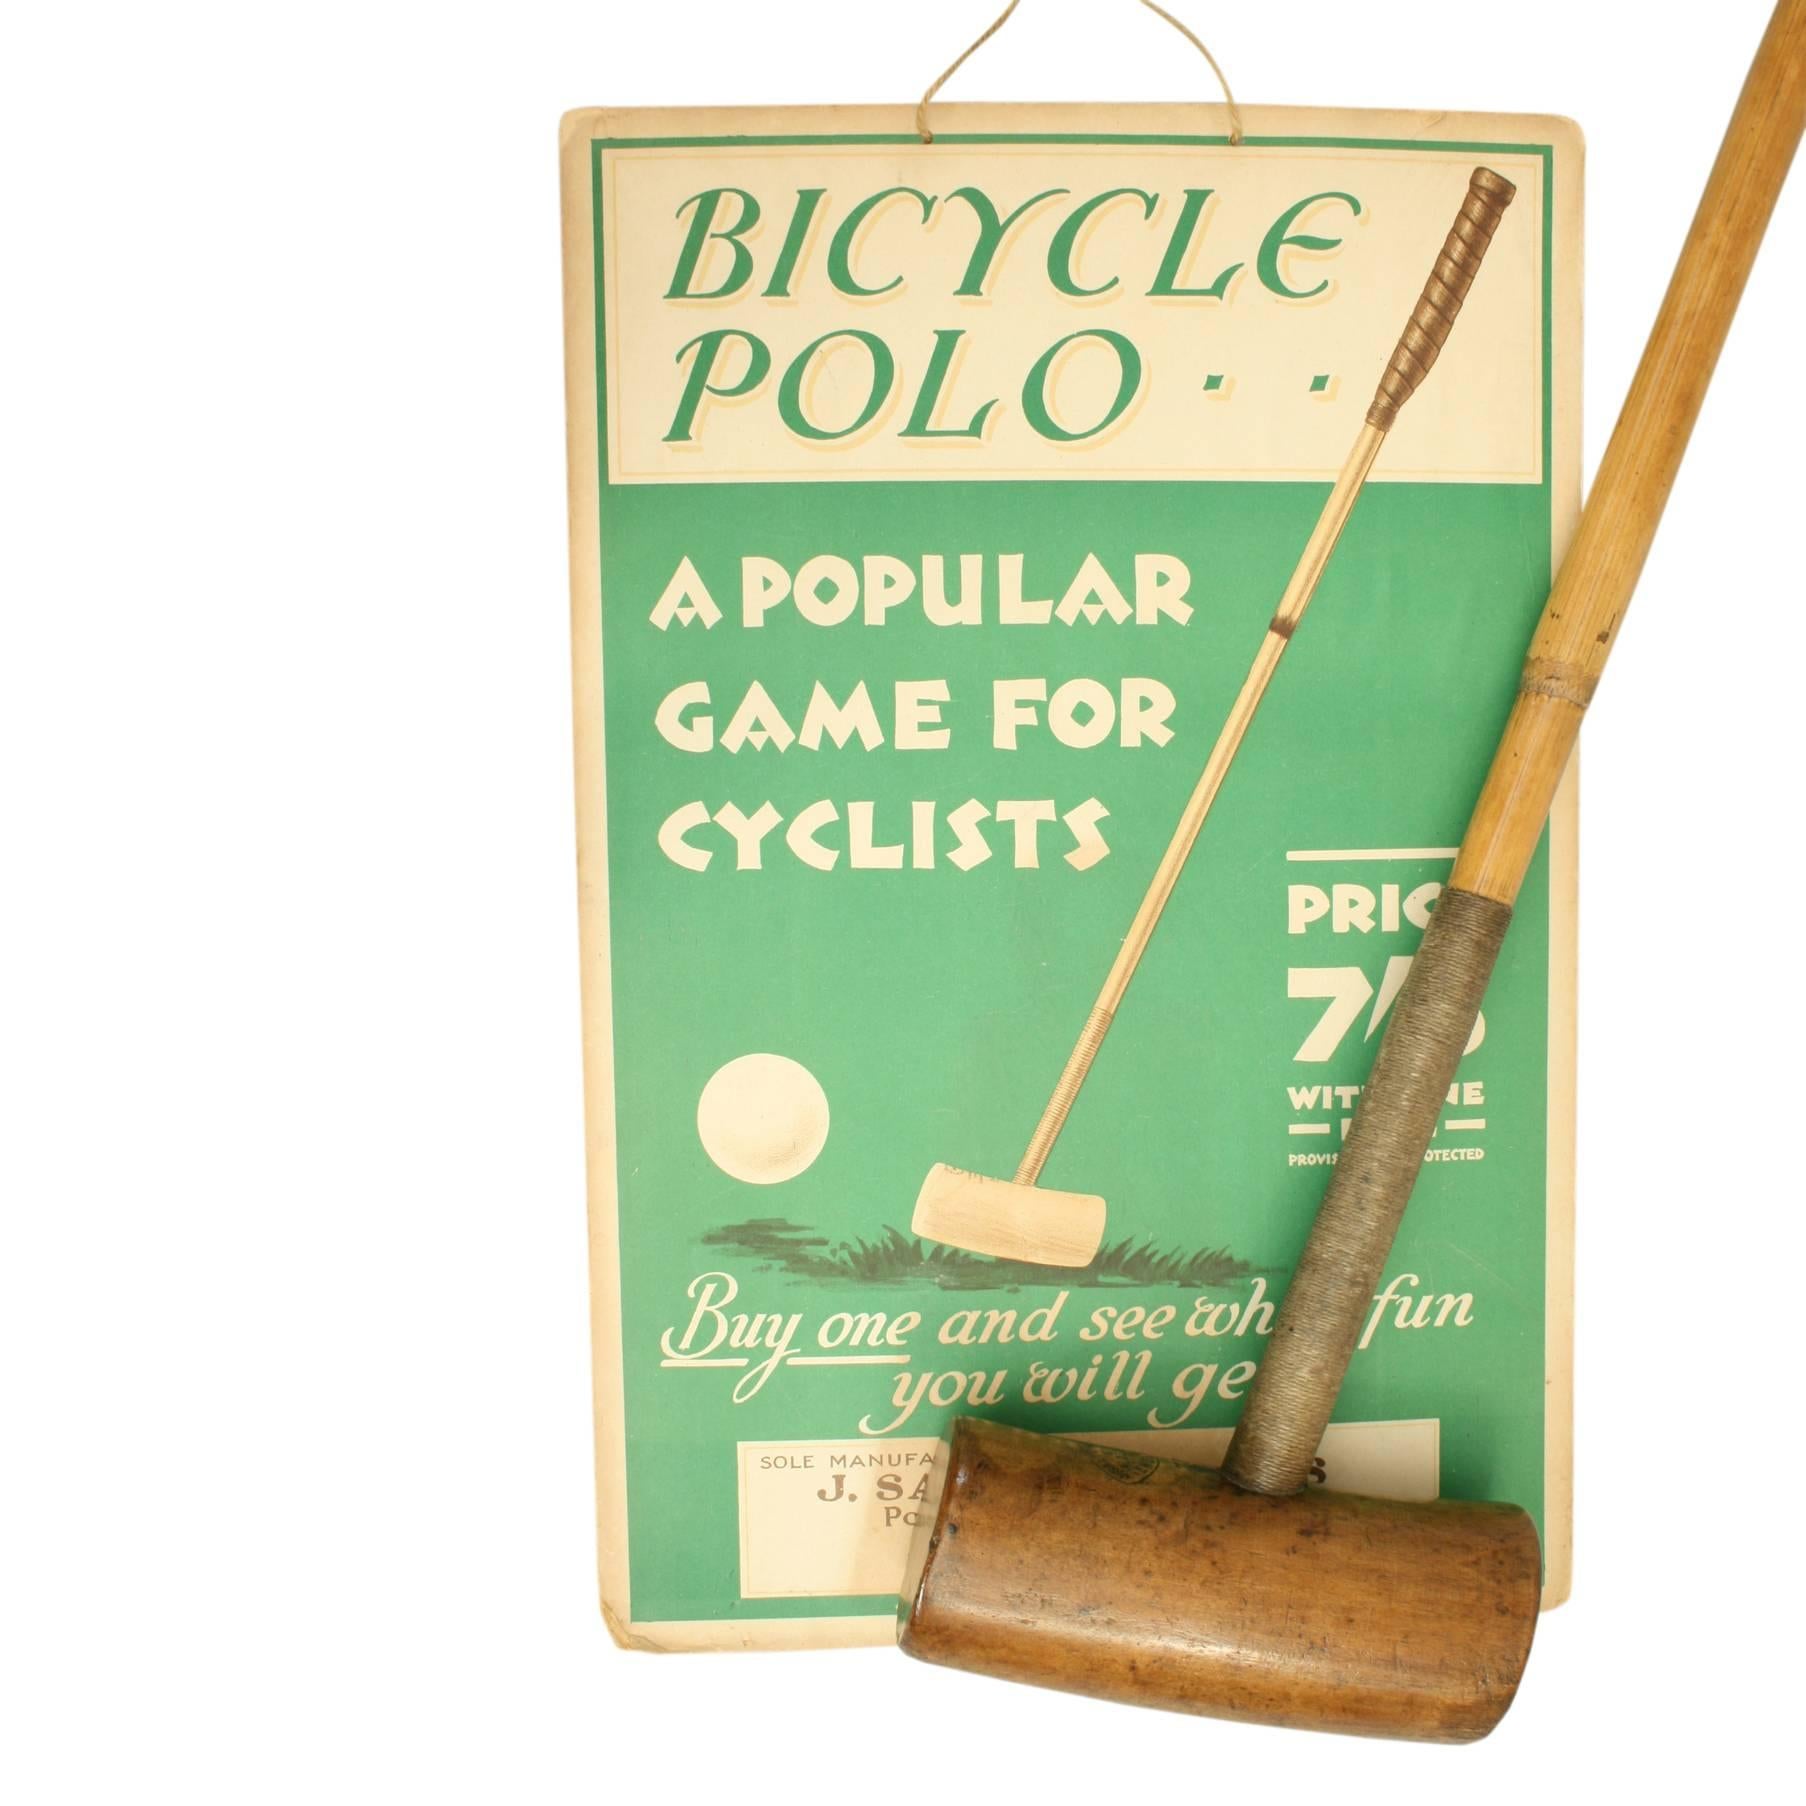 Salter & Sons Bicycle Polo Advert and Mallet, Aldershot.
A wonderful striking bicycle polo poster by J. Salter & Sons of Aldershot. They proudly announce on their advertisement that they are the 'sole makers for bicycle polo sticks' and it is 'a